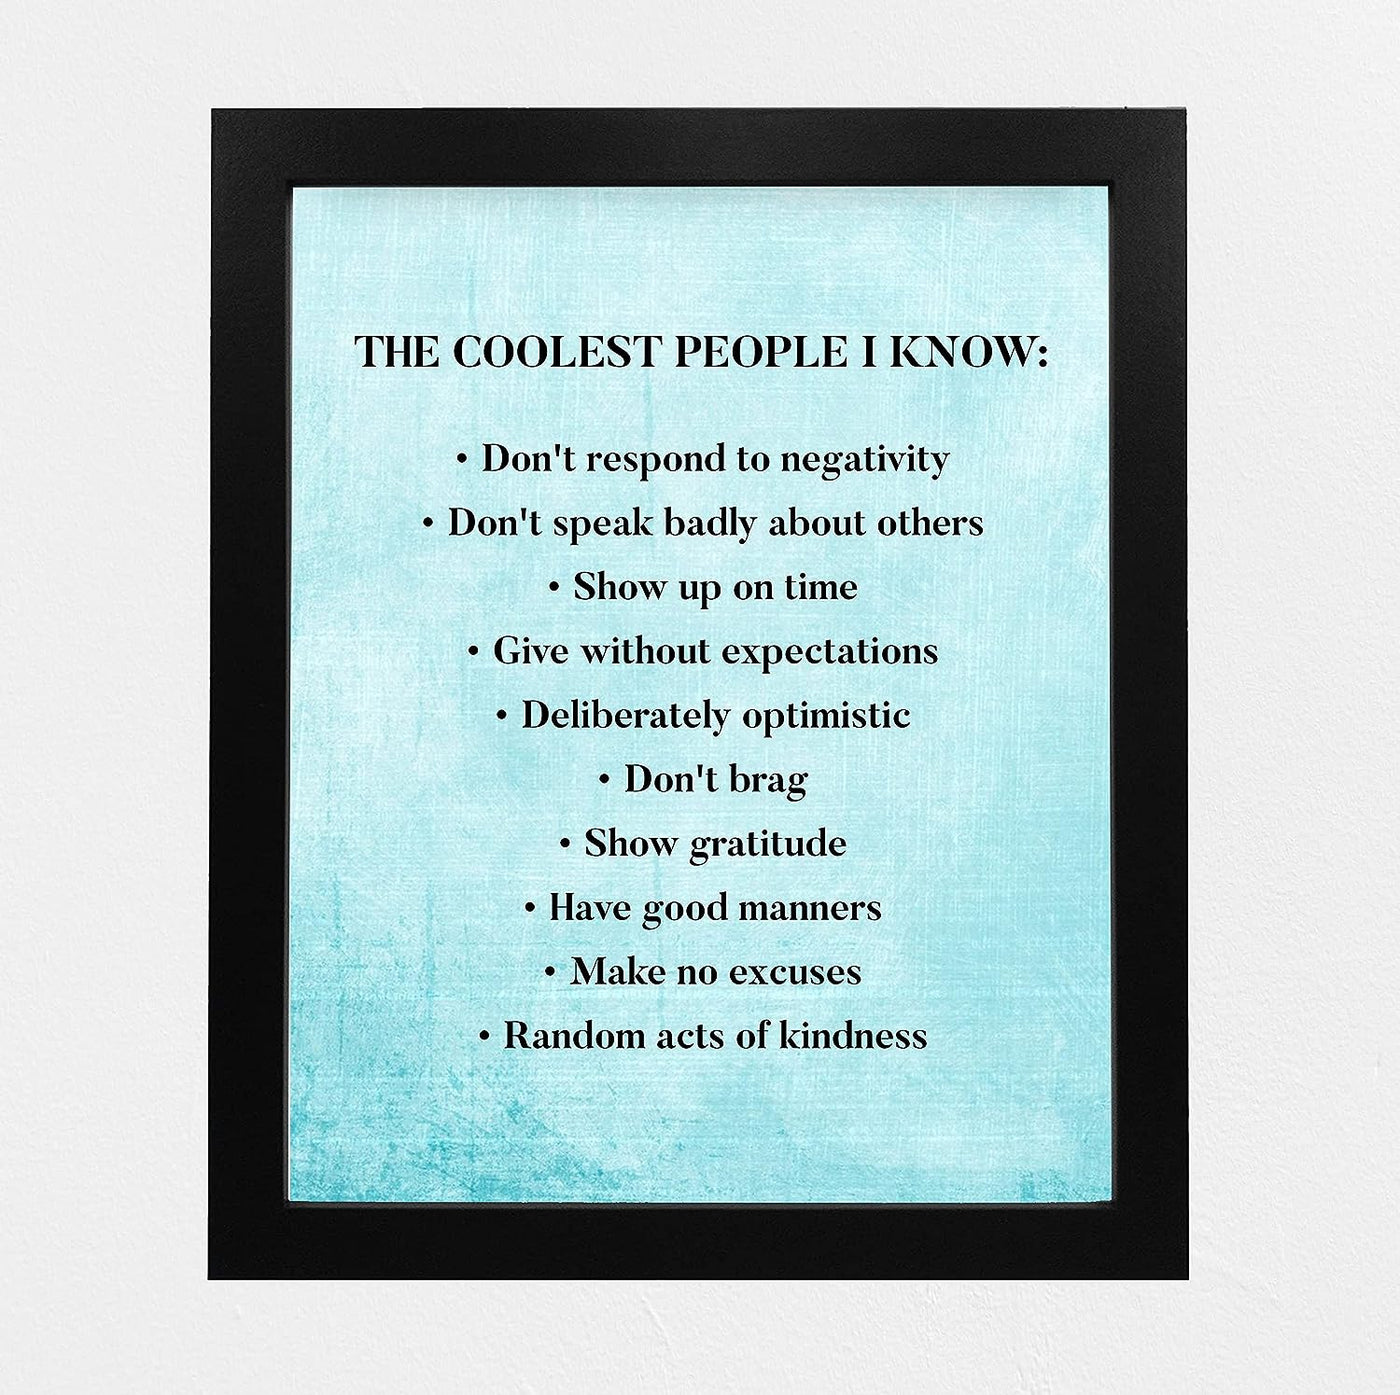 The Coolest People I Know Motivational Quotes Wall Sign -8 x 10" Inspirational Typographic Art Print-Ready to Frame. Modern Home-Office-Desk-School-Gym Decor. Great Sign for Motivation-Be Cool!